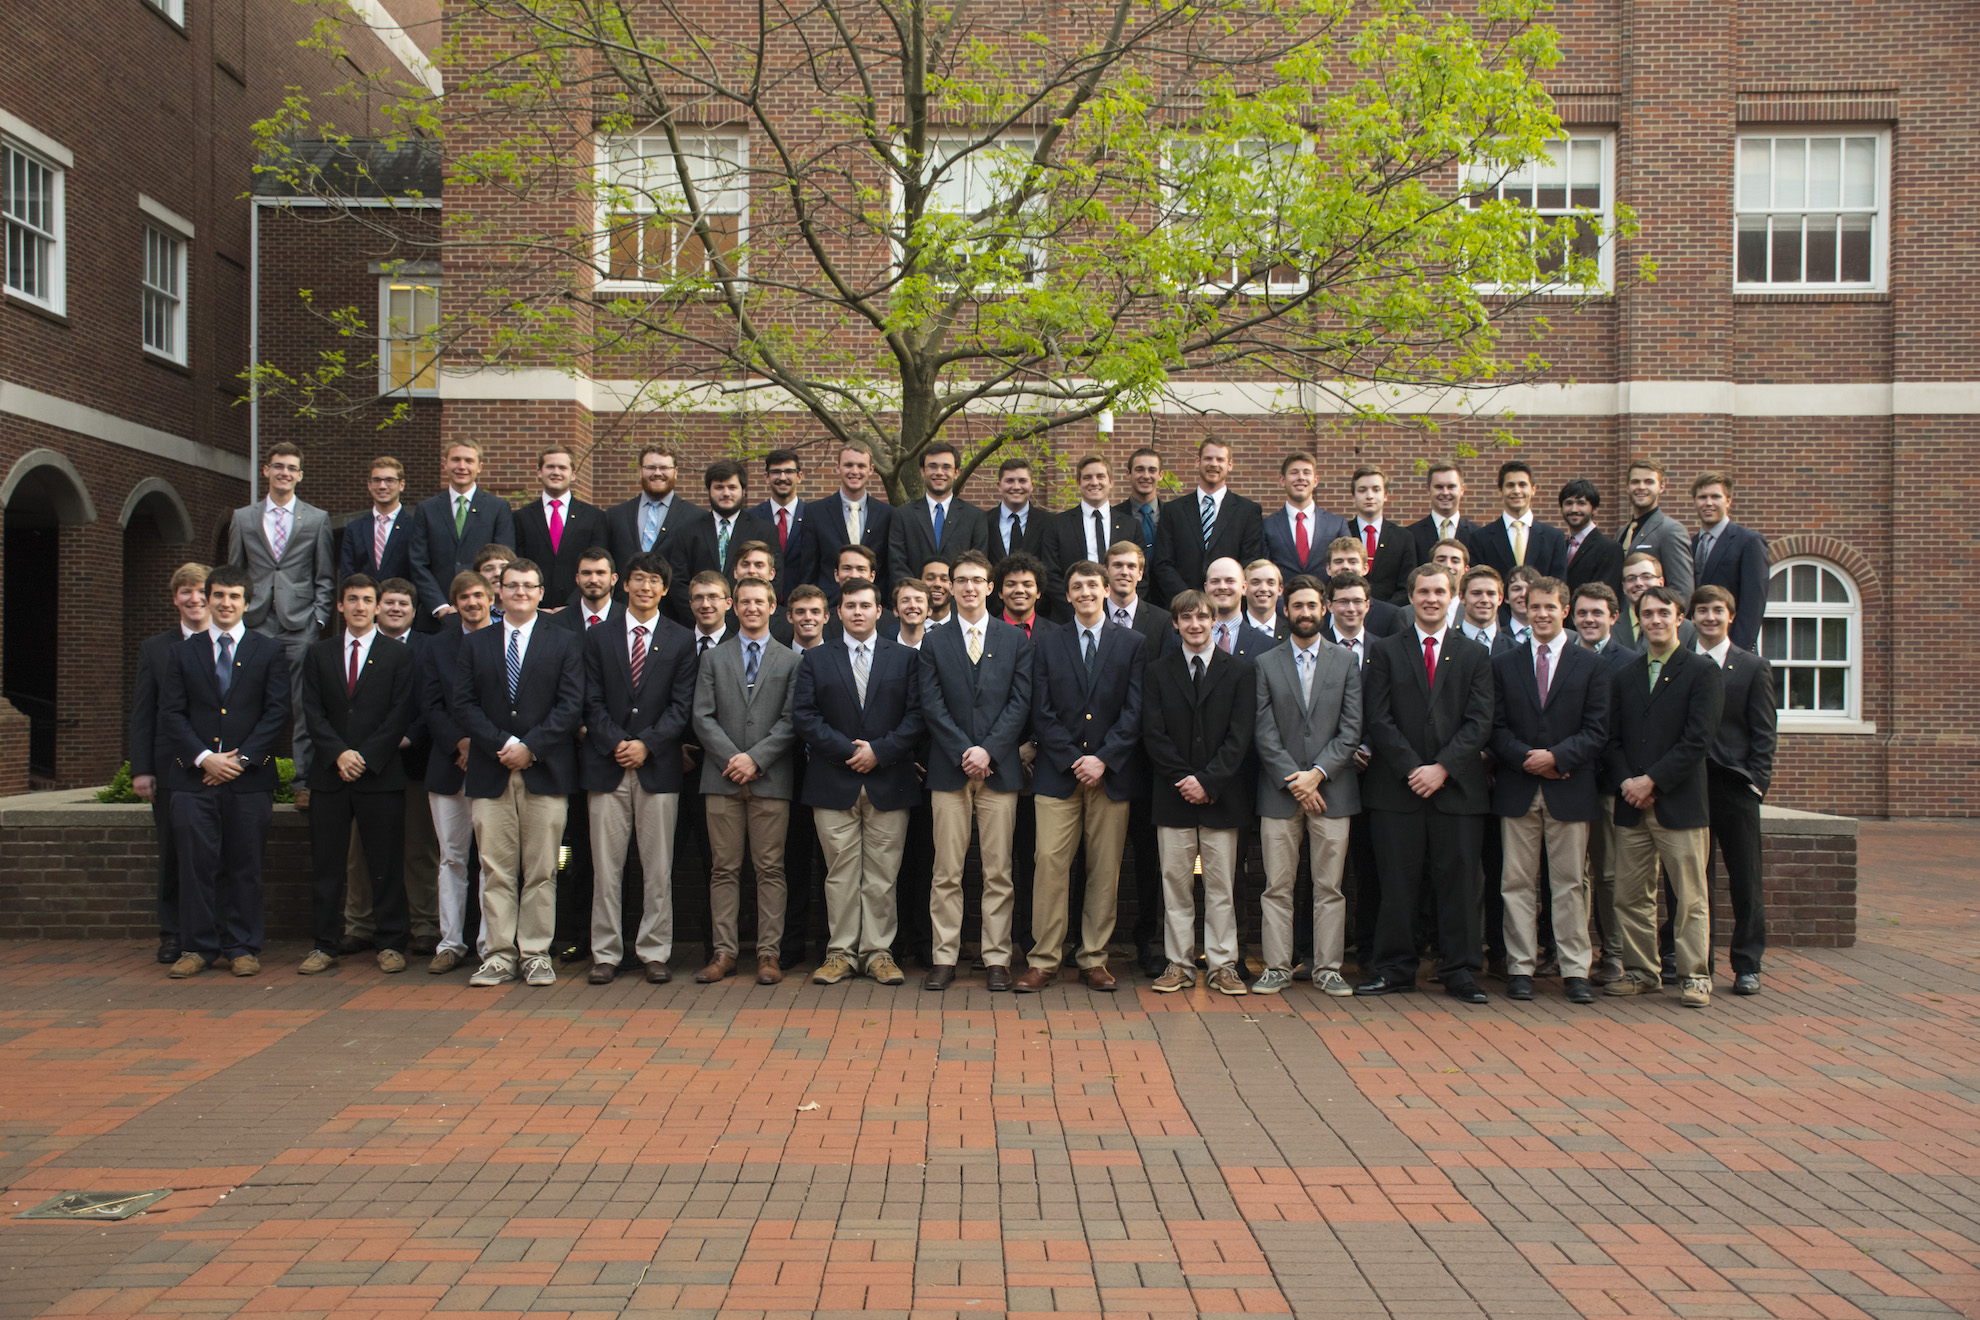 photo of entire fraternity